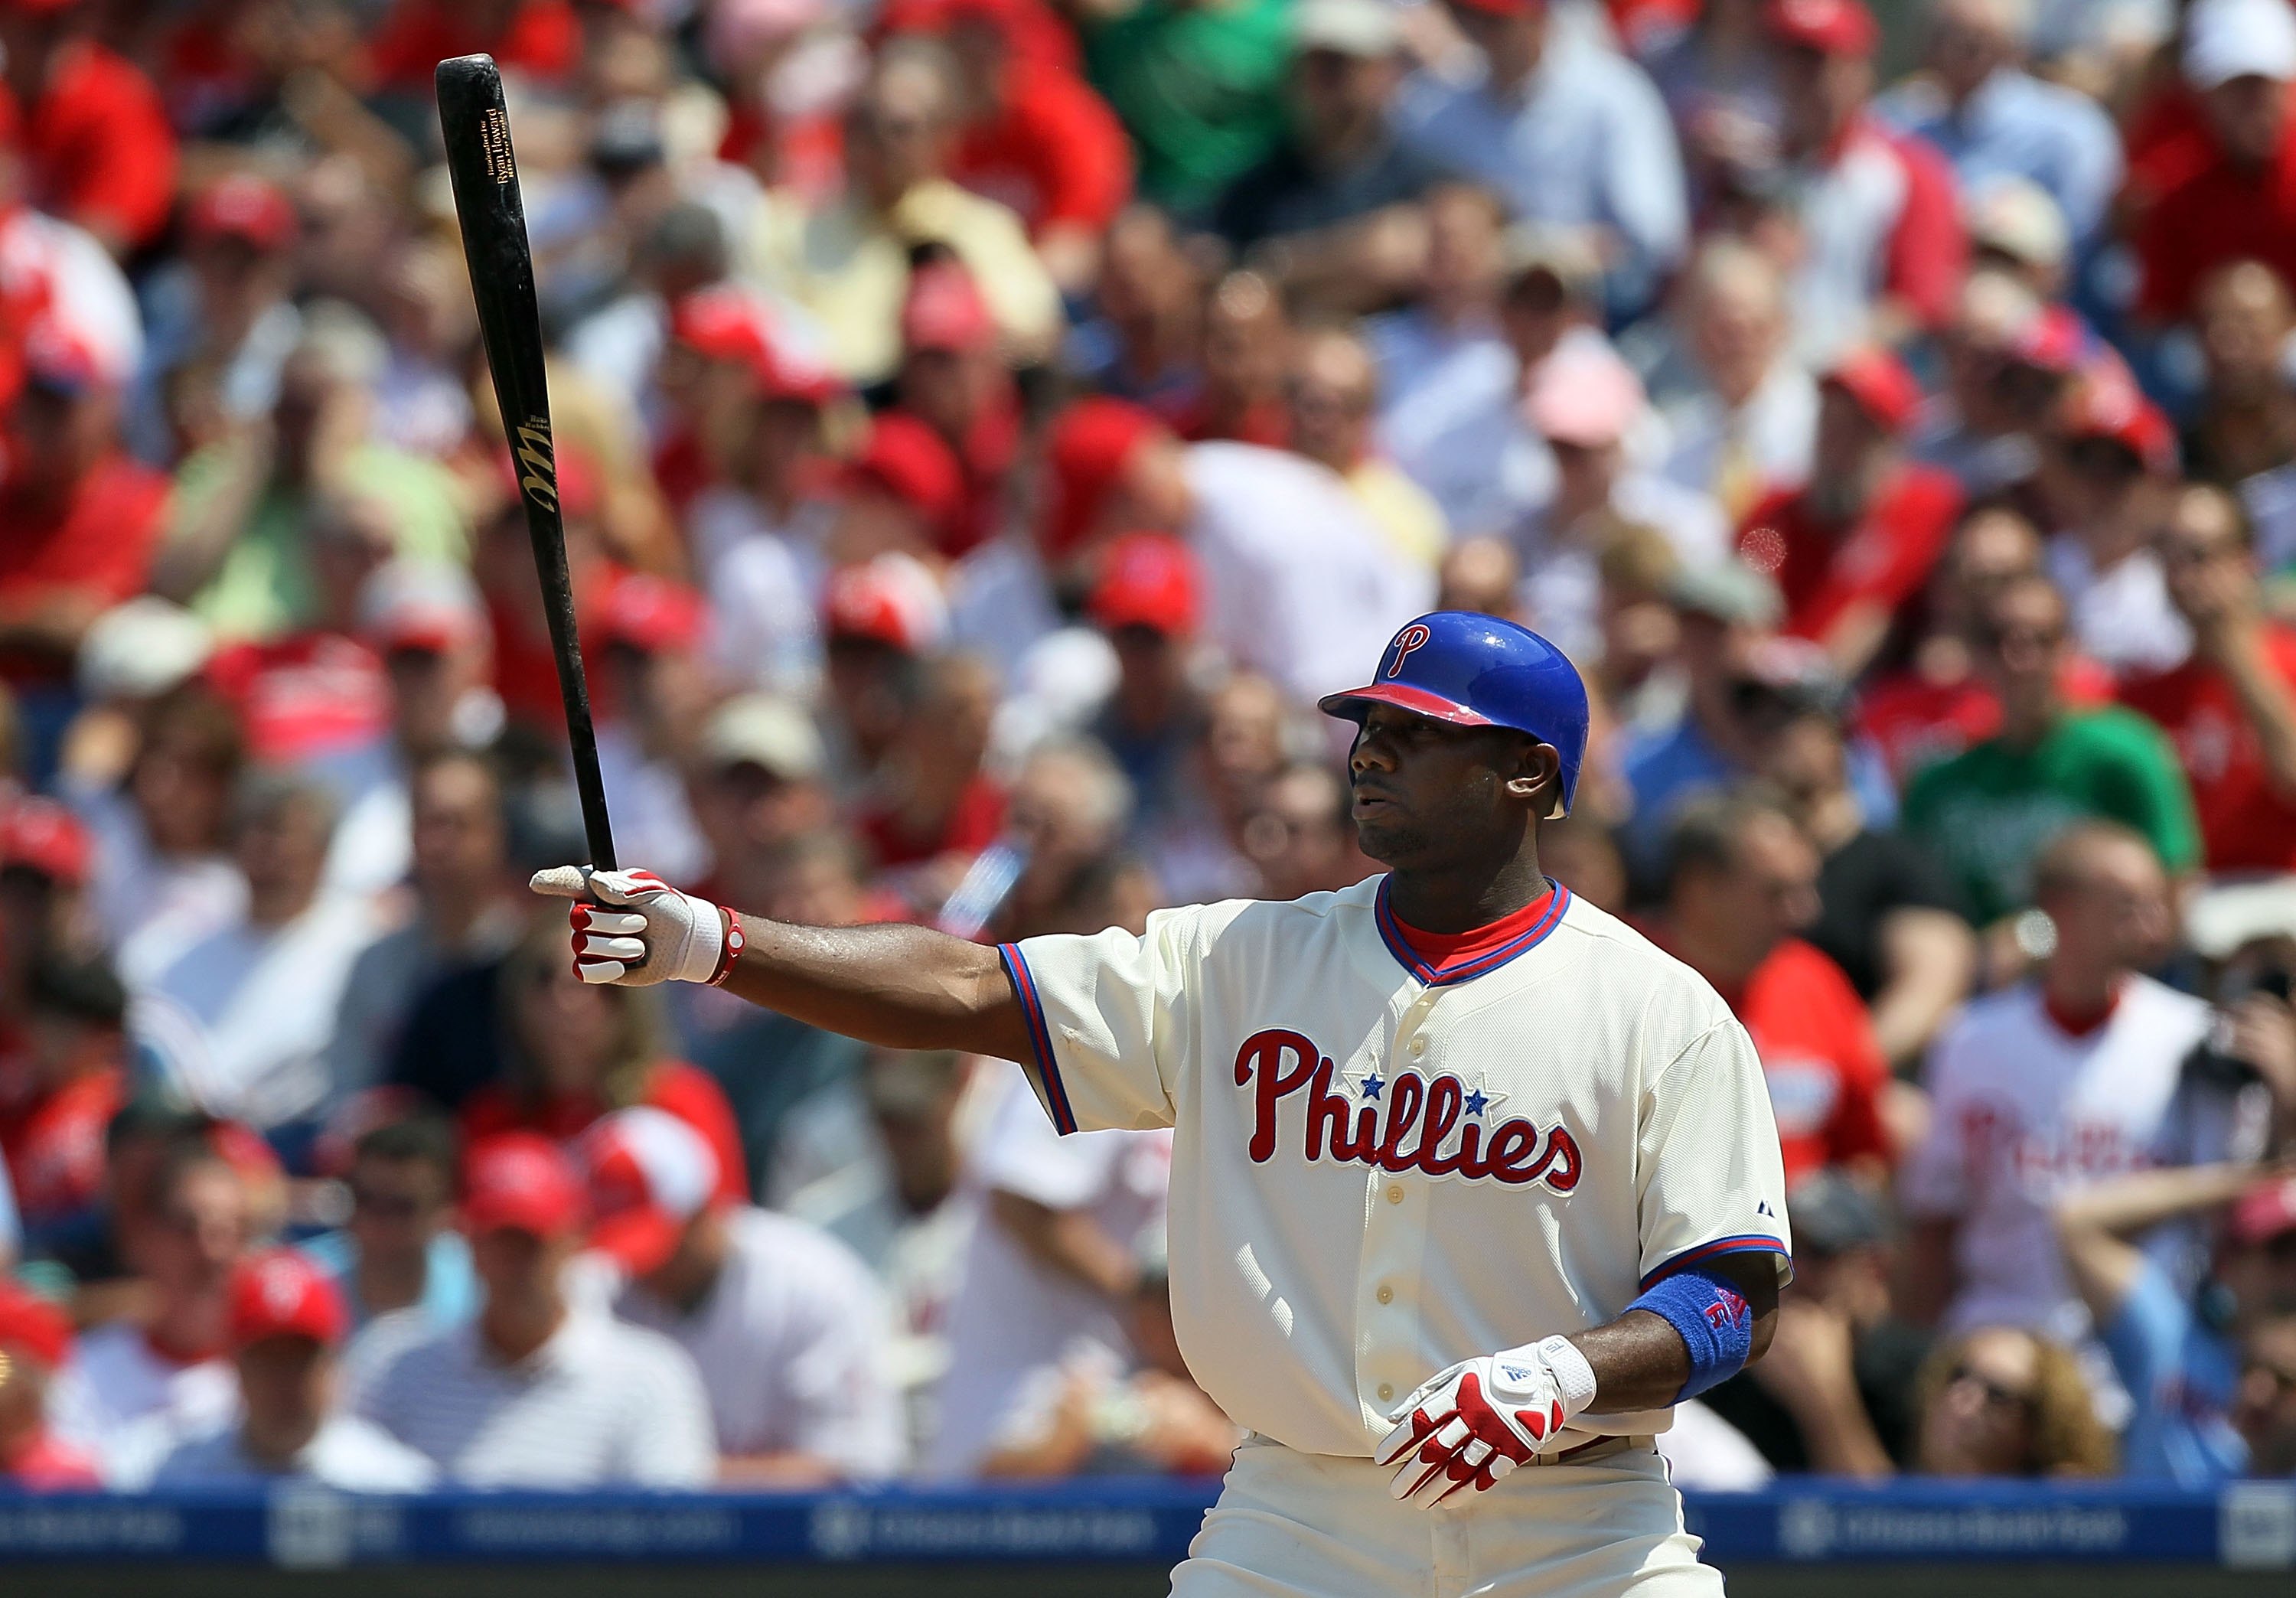 Phillies Legend Jimmy Rollins Lists Home for Record-Breaking $12 Million -  Cash Flow Sports